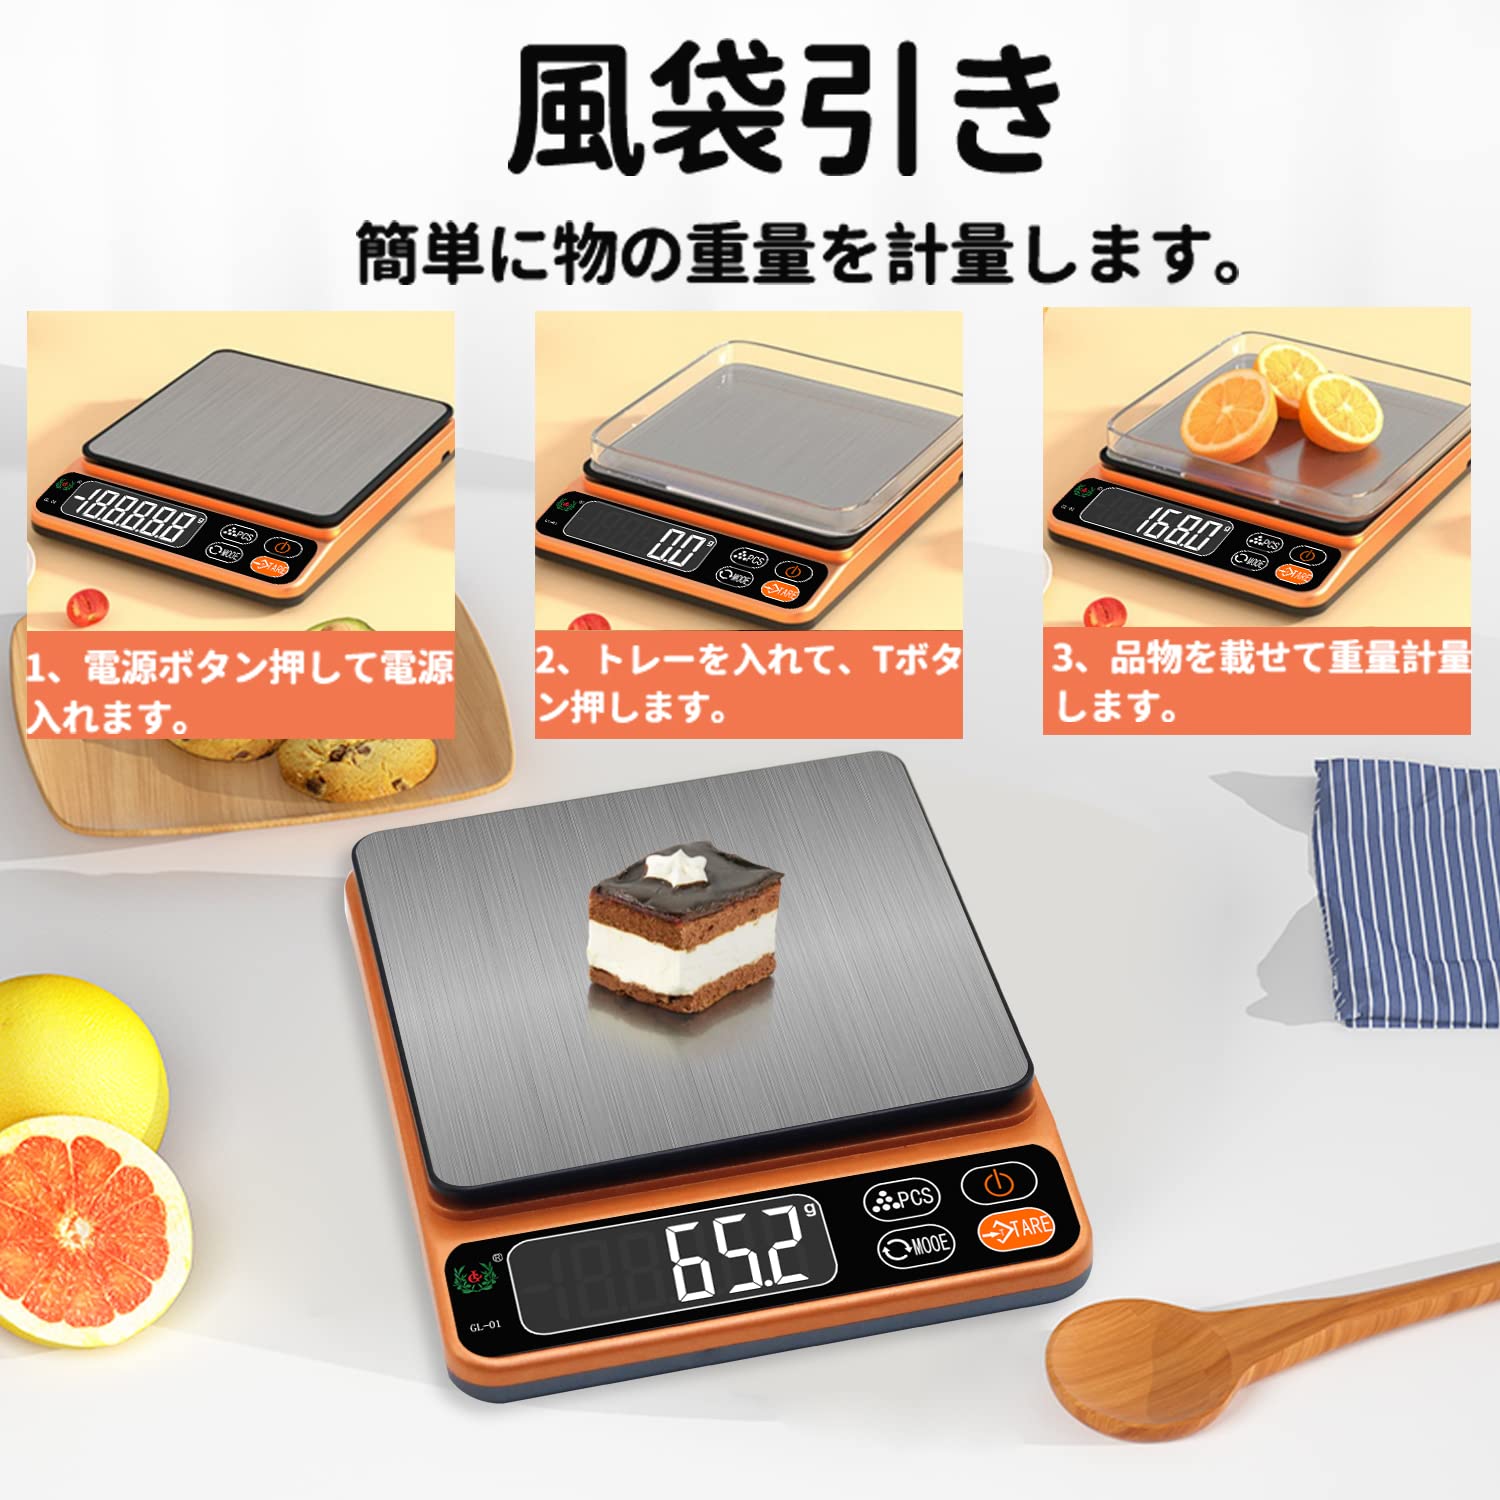 SCALE JAZZ measuring digital scale scale electron scales measuring 5000g 0.1g unit 5kg measure compact amount measurement manner sack discount power supply self 